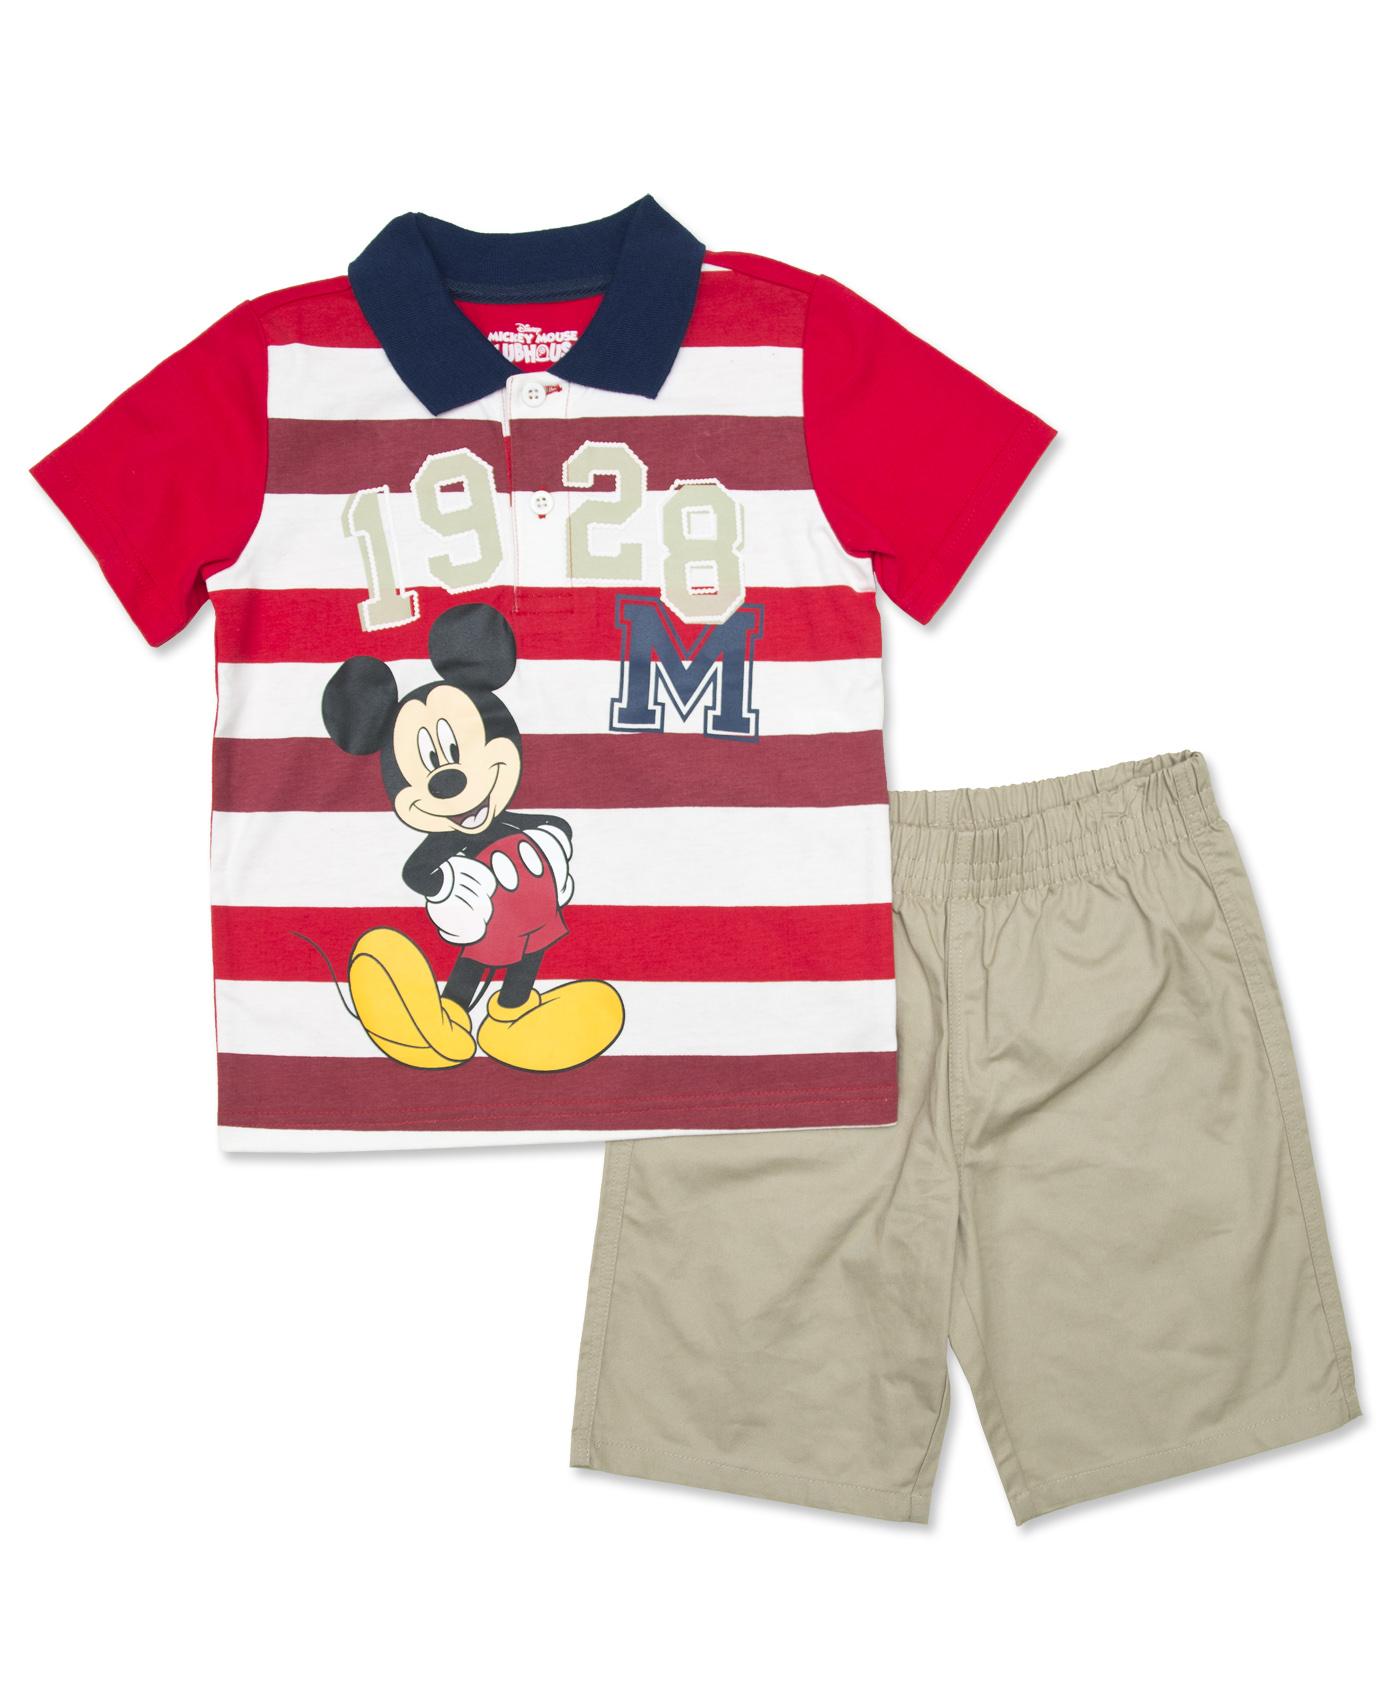 Disney Mickey Mouse Infant & Toddler Boy's Polo Shirt & Shorts - Striped